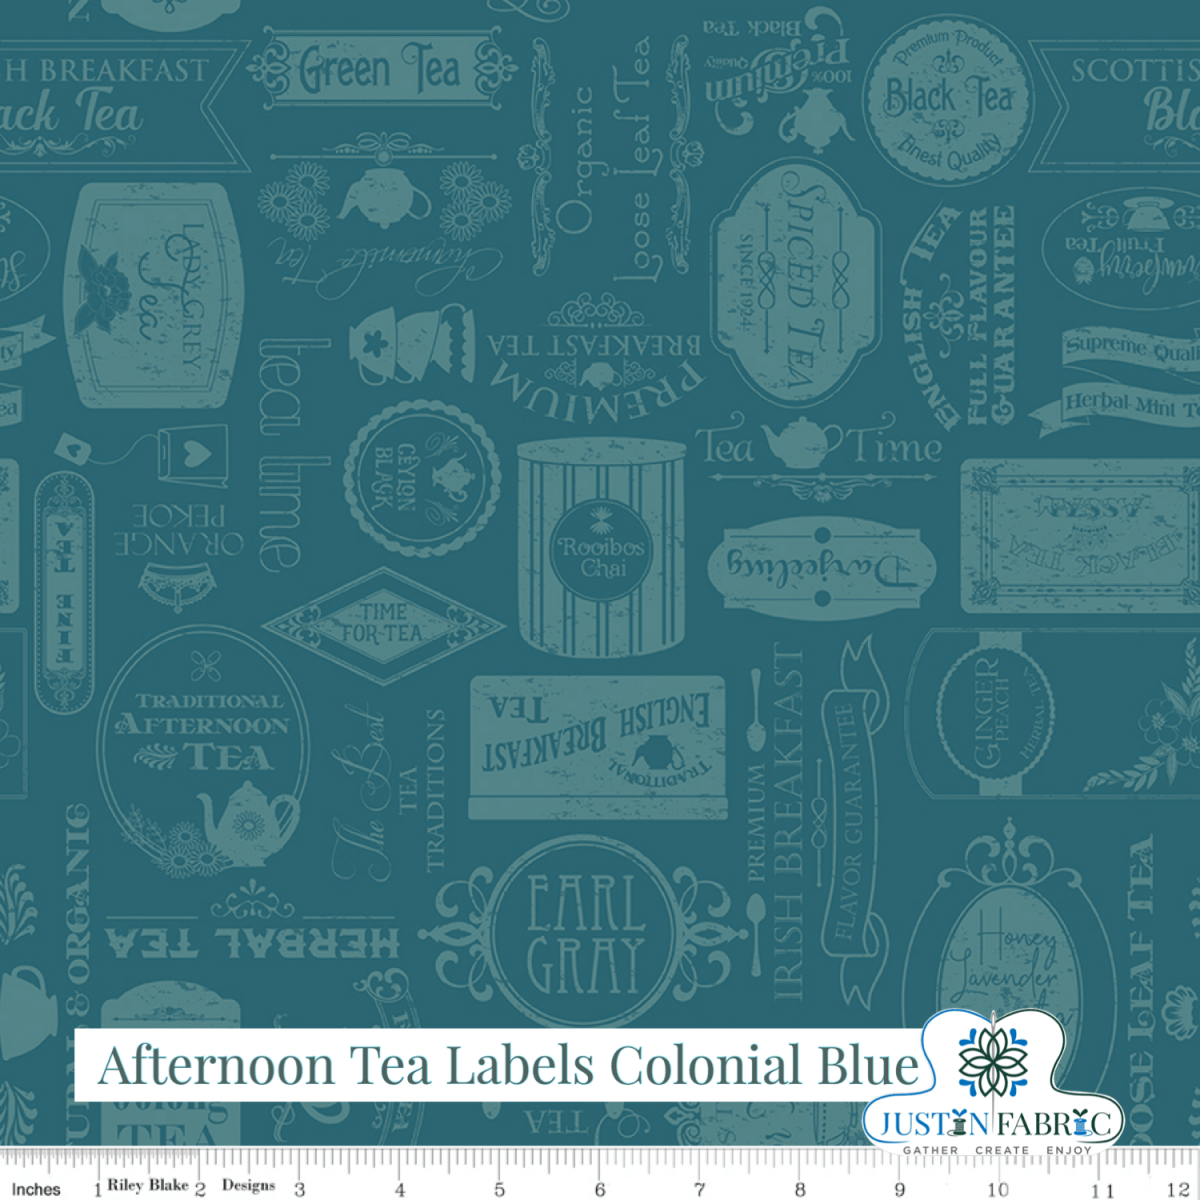 Afternoon Tea Labels Colonial Blue Yardage | SKU: C14032-COLBLUE -C14032-COLBLUE - Justin Fabric!